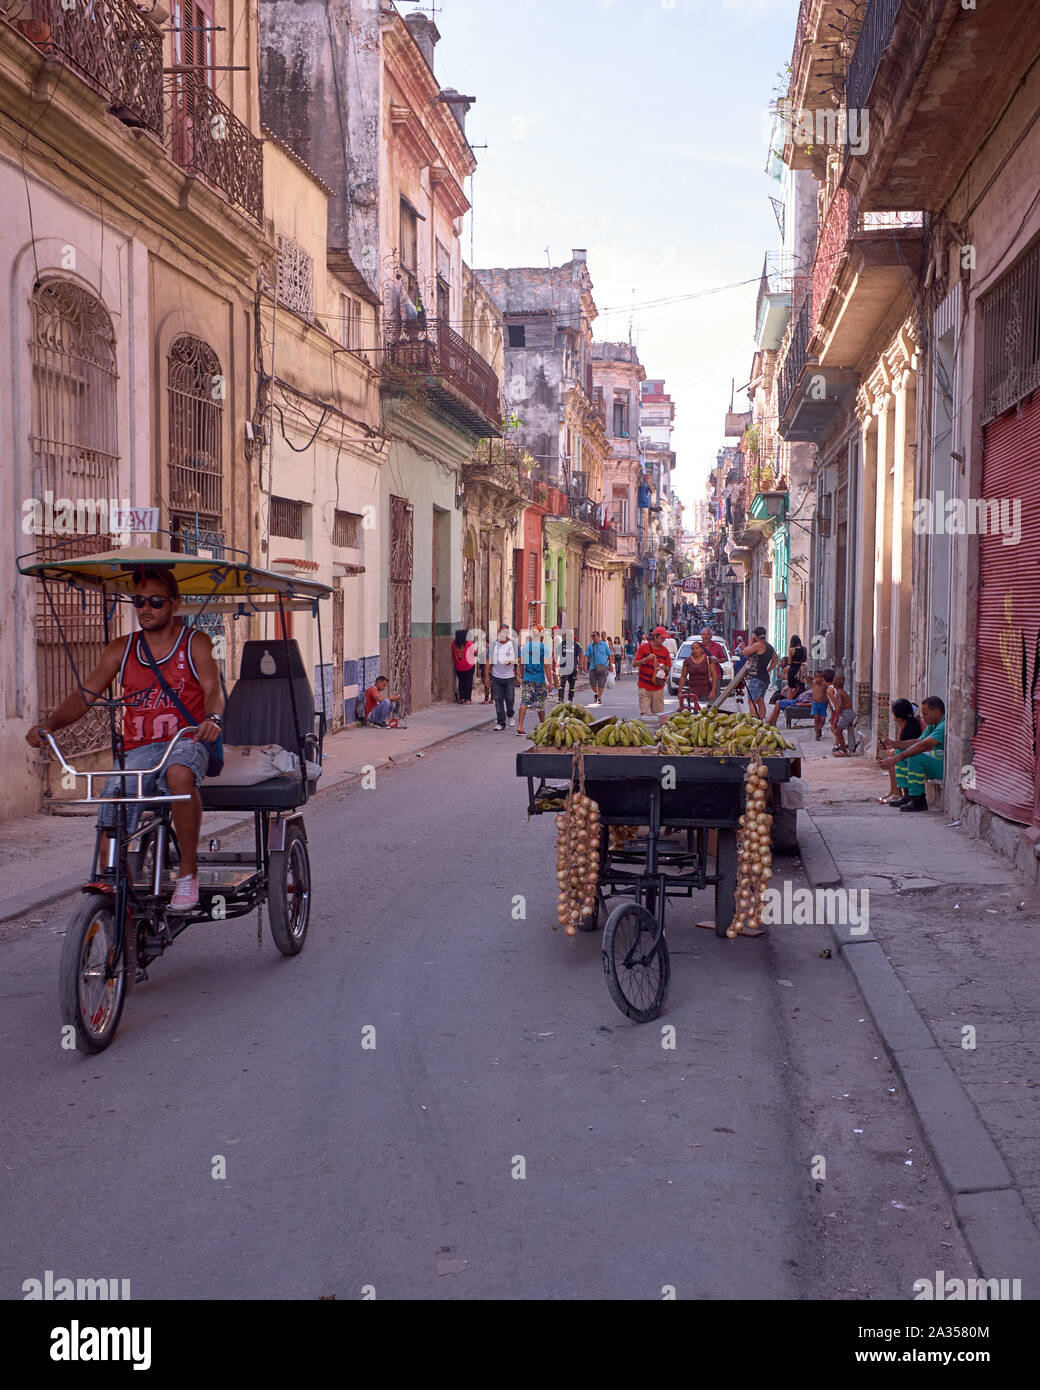 Onions and bananas for sale on a cart in Havana, Cuba Stock Photo